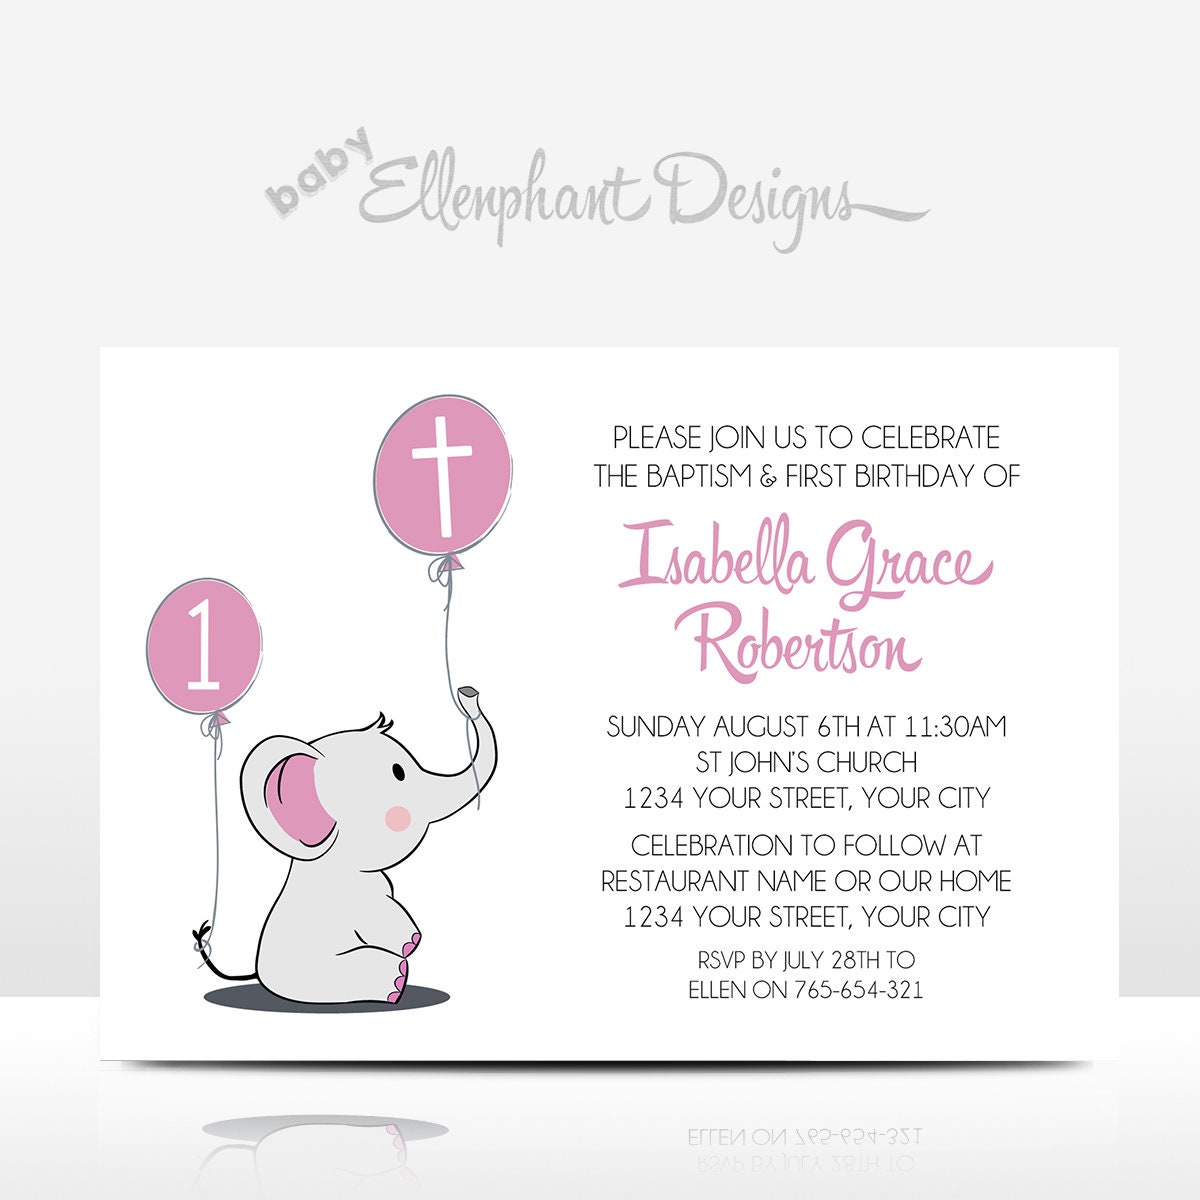 Girl & Boy Joint Christening & First Birthday Invitations Cards Free Envelopes 